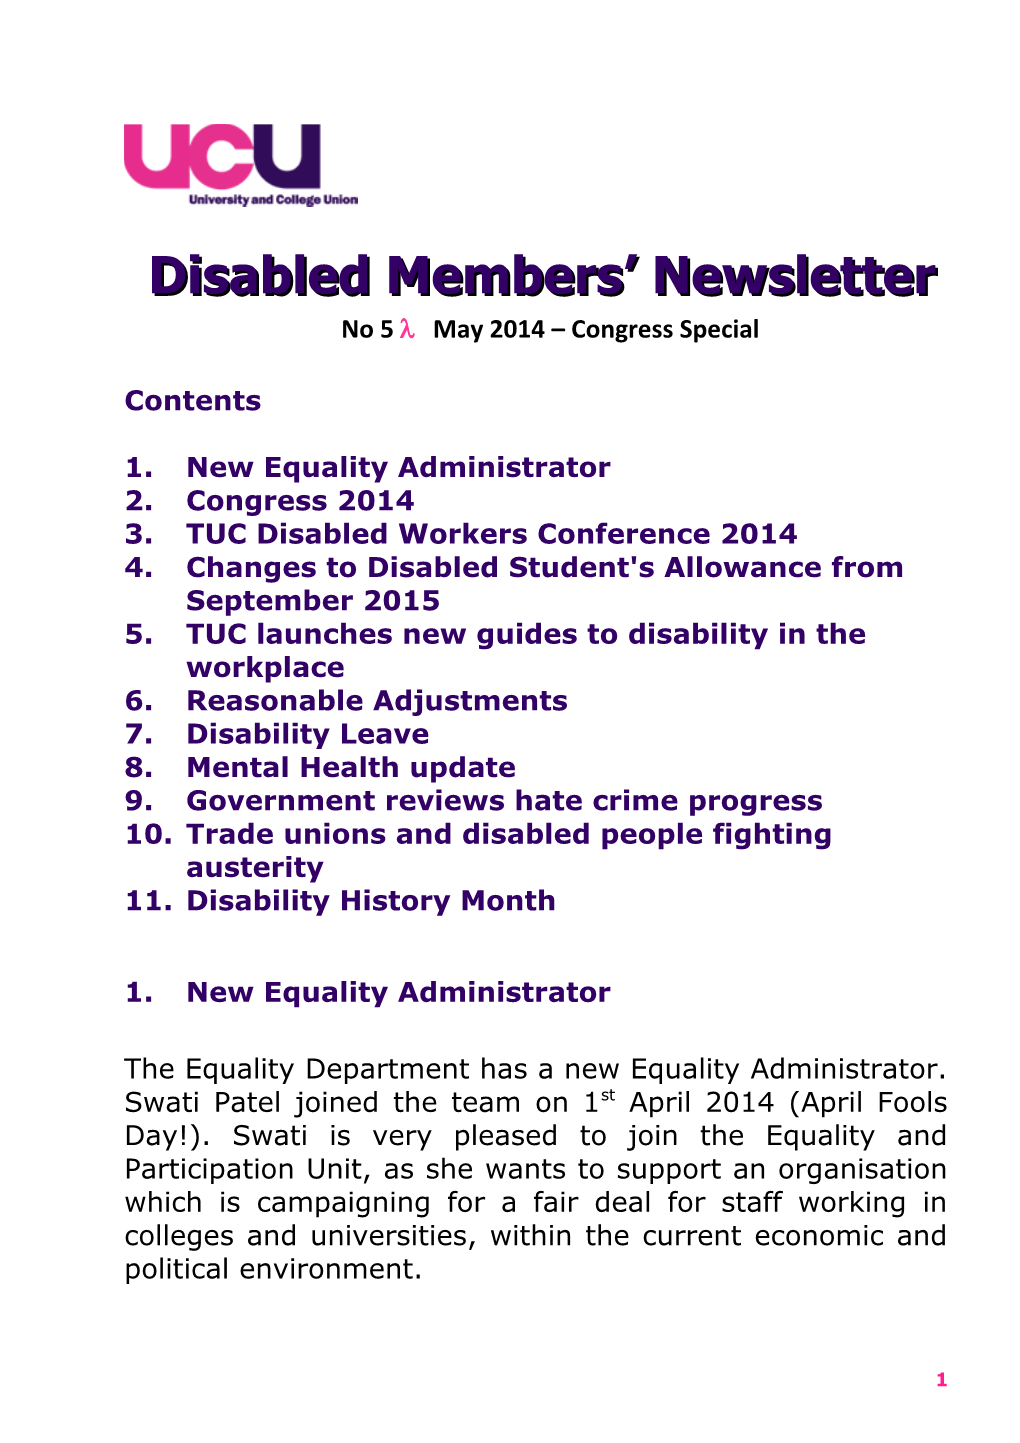 3.TUC Disabled Workers Conference 2014